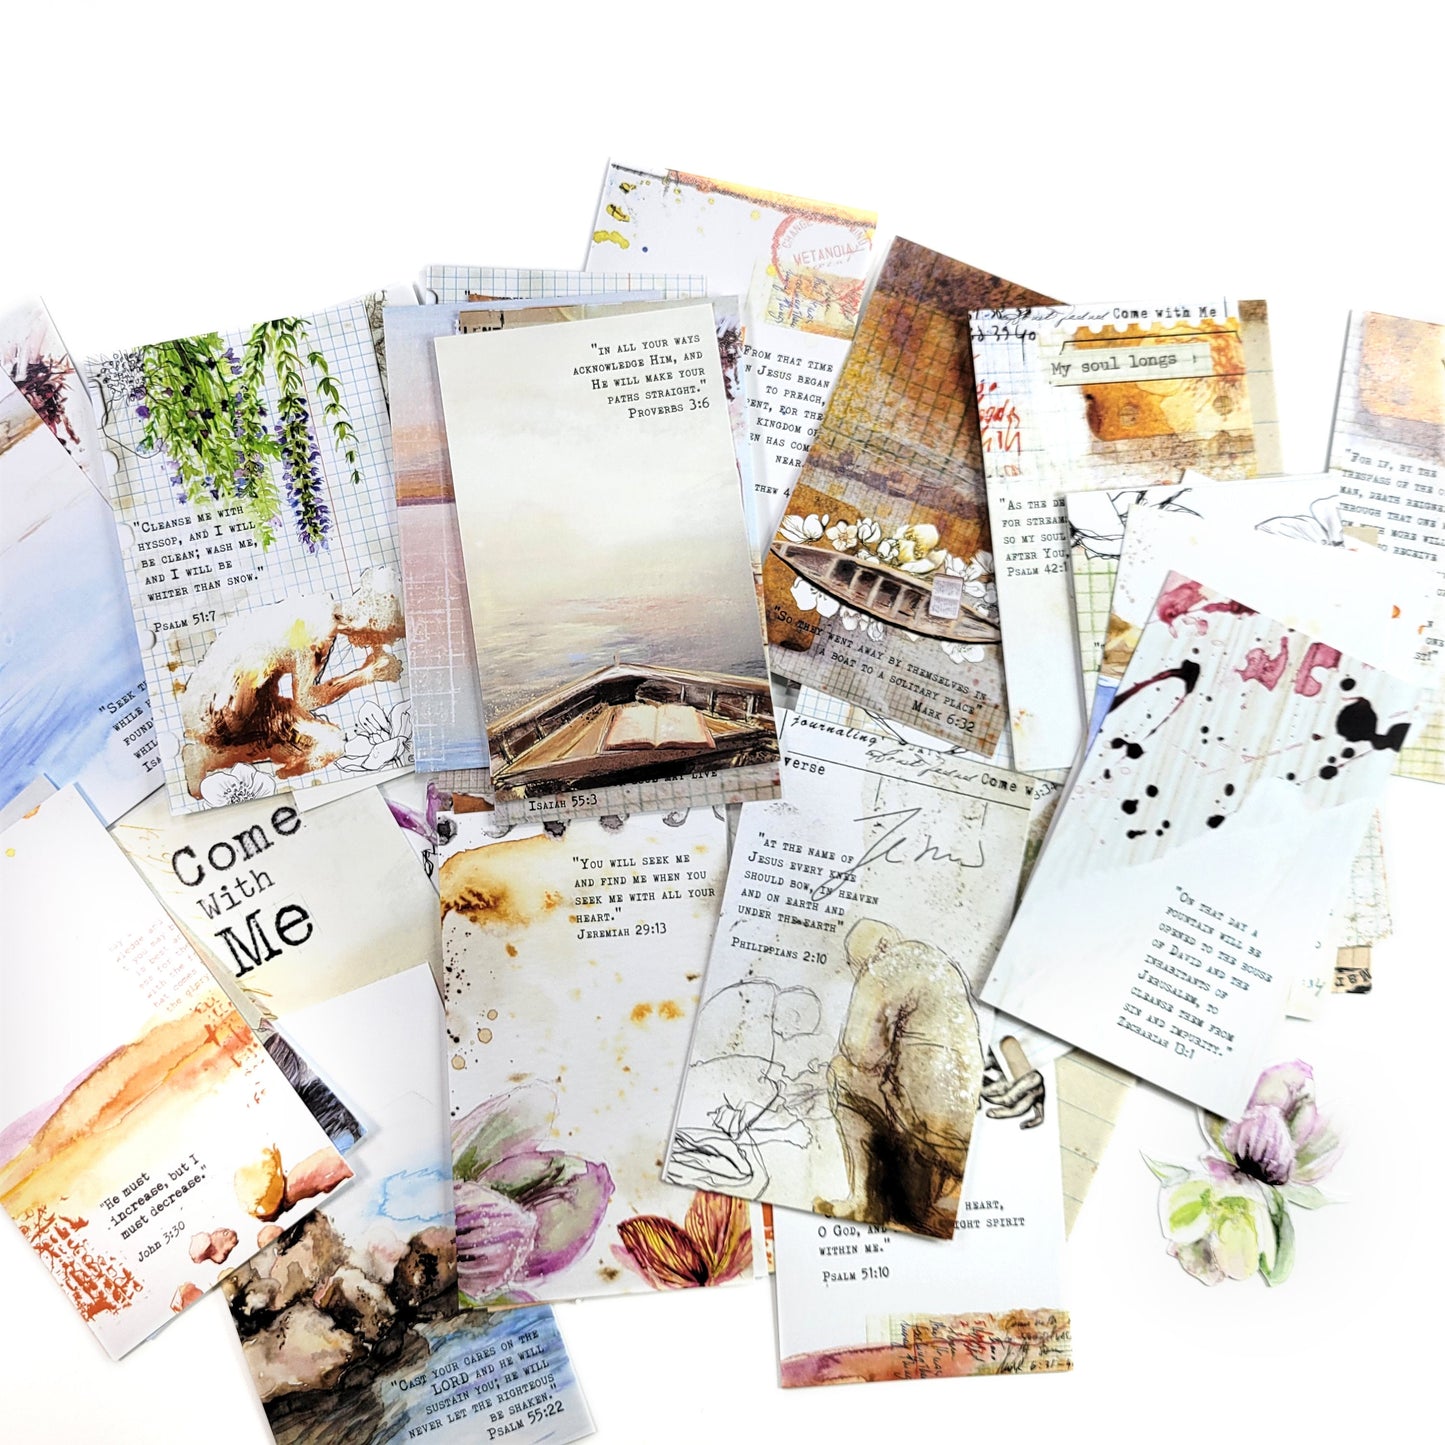 Come with Me - set of 40 illustrated Bible Journaling Cards with Bible verses